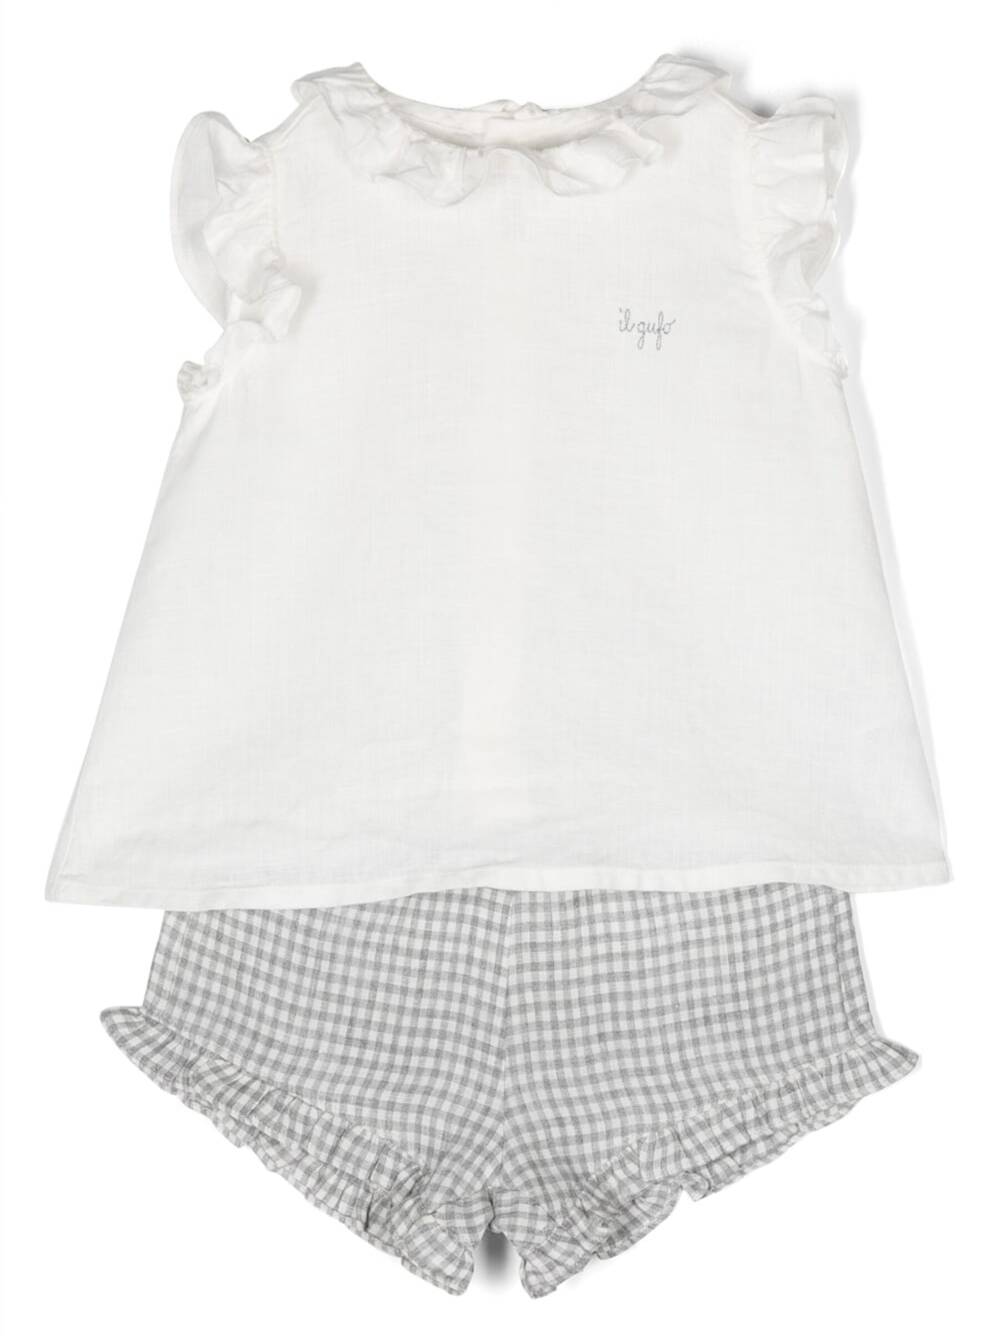 IL GUFO WHITE BLOUSE AND SHORTS MATCHING SET IN LINEN BABY